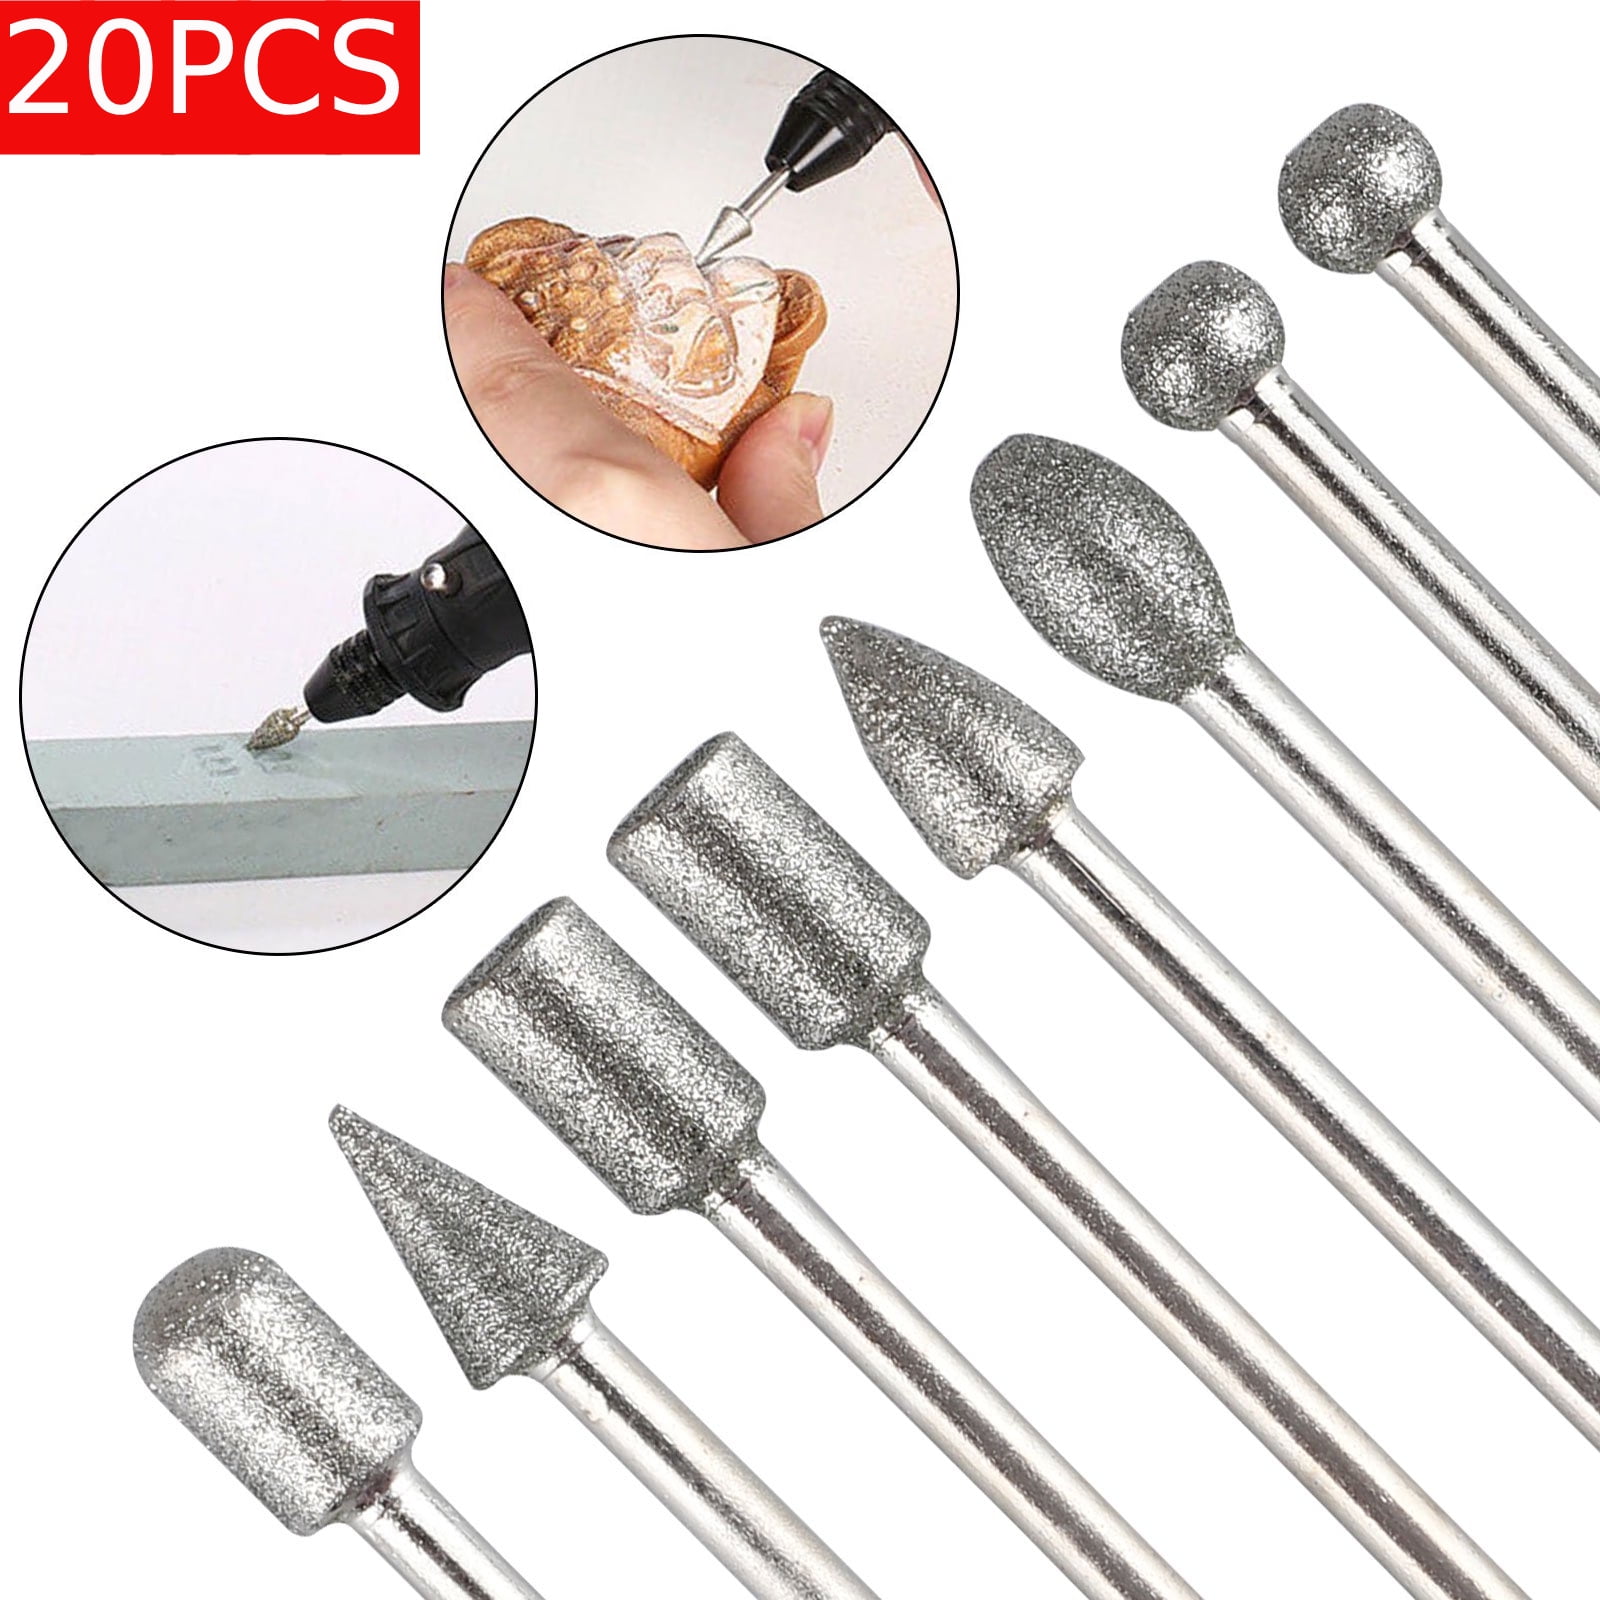 48# Diamond Cylindrical Grinding Head Drill Bits For Jewlery Metal Carving 20Pcs 